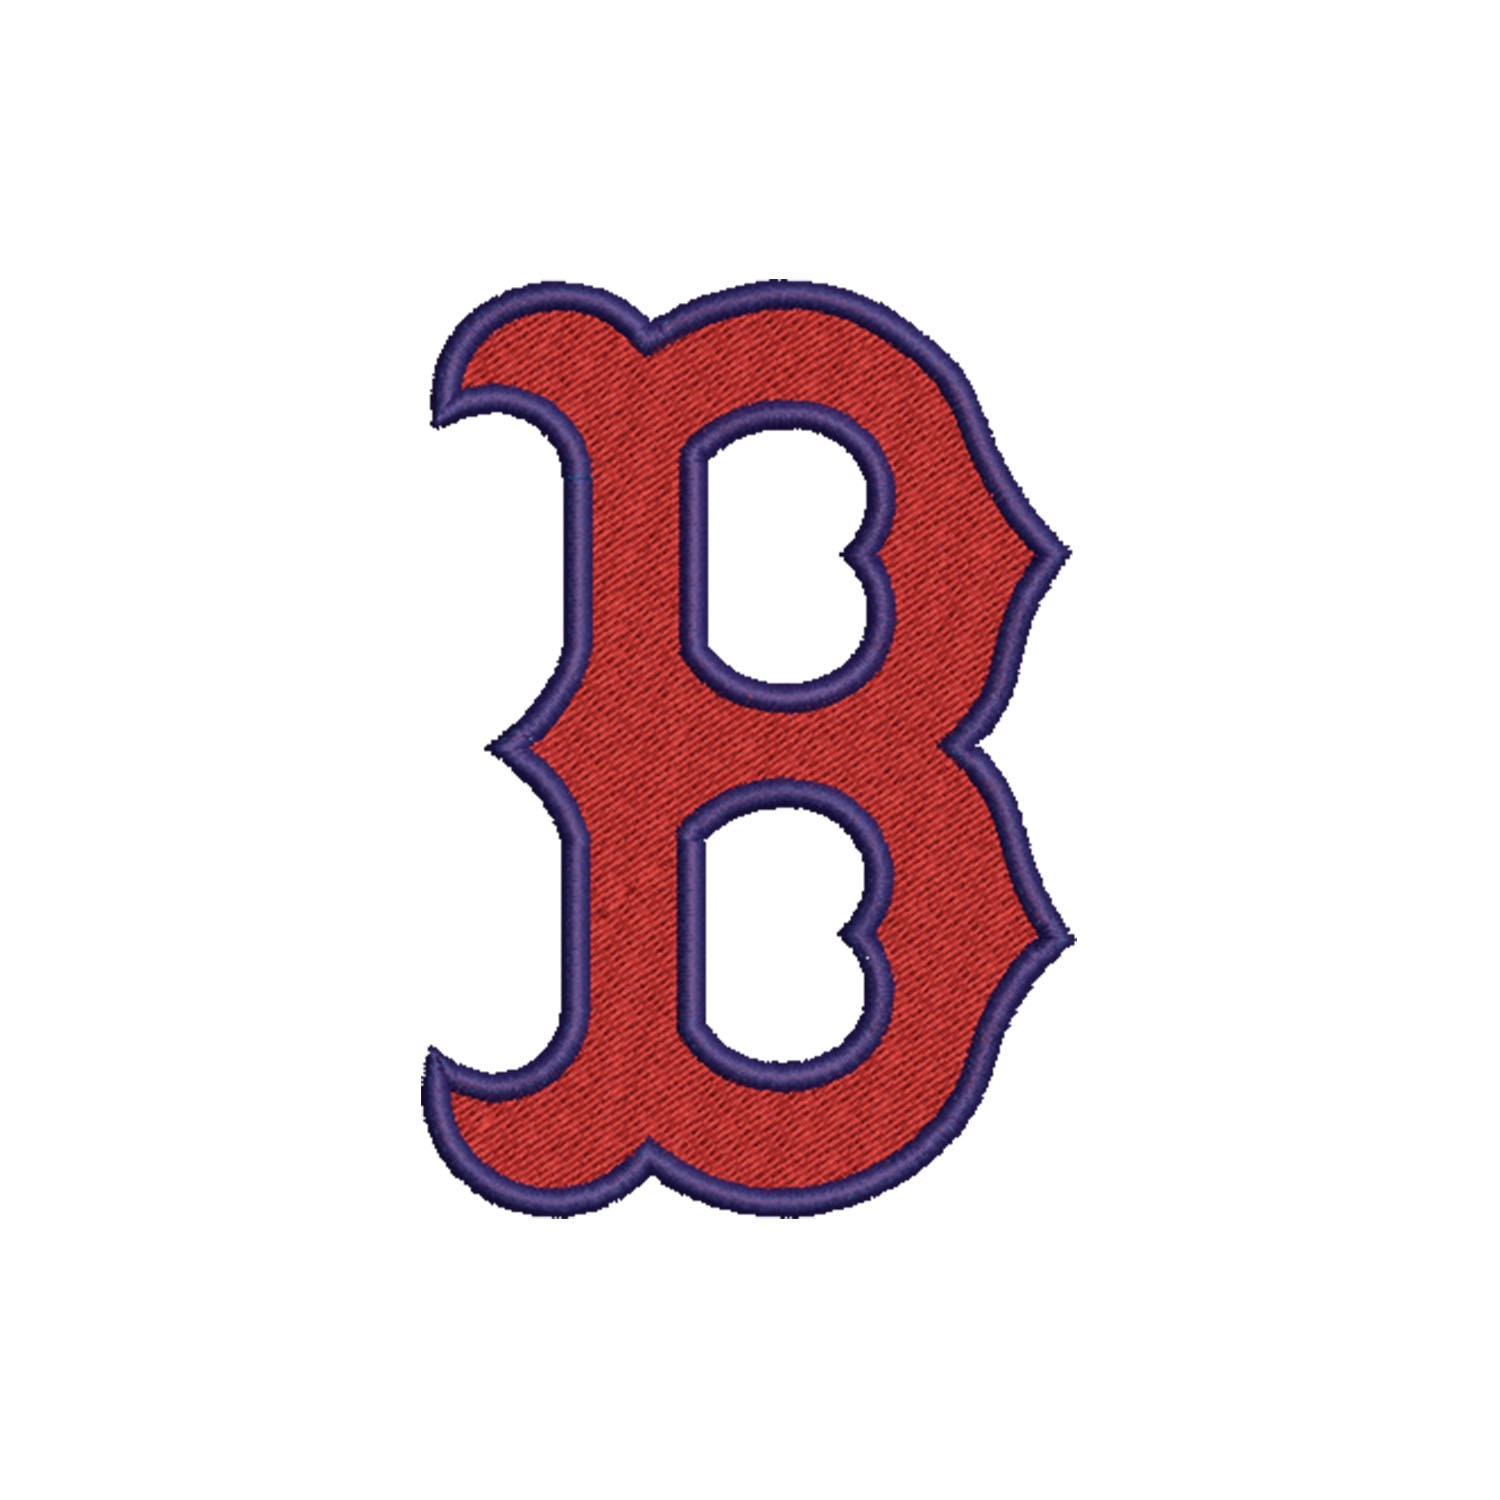 Boston Red Sox machine embroidery design design for kids fill | Etsy